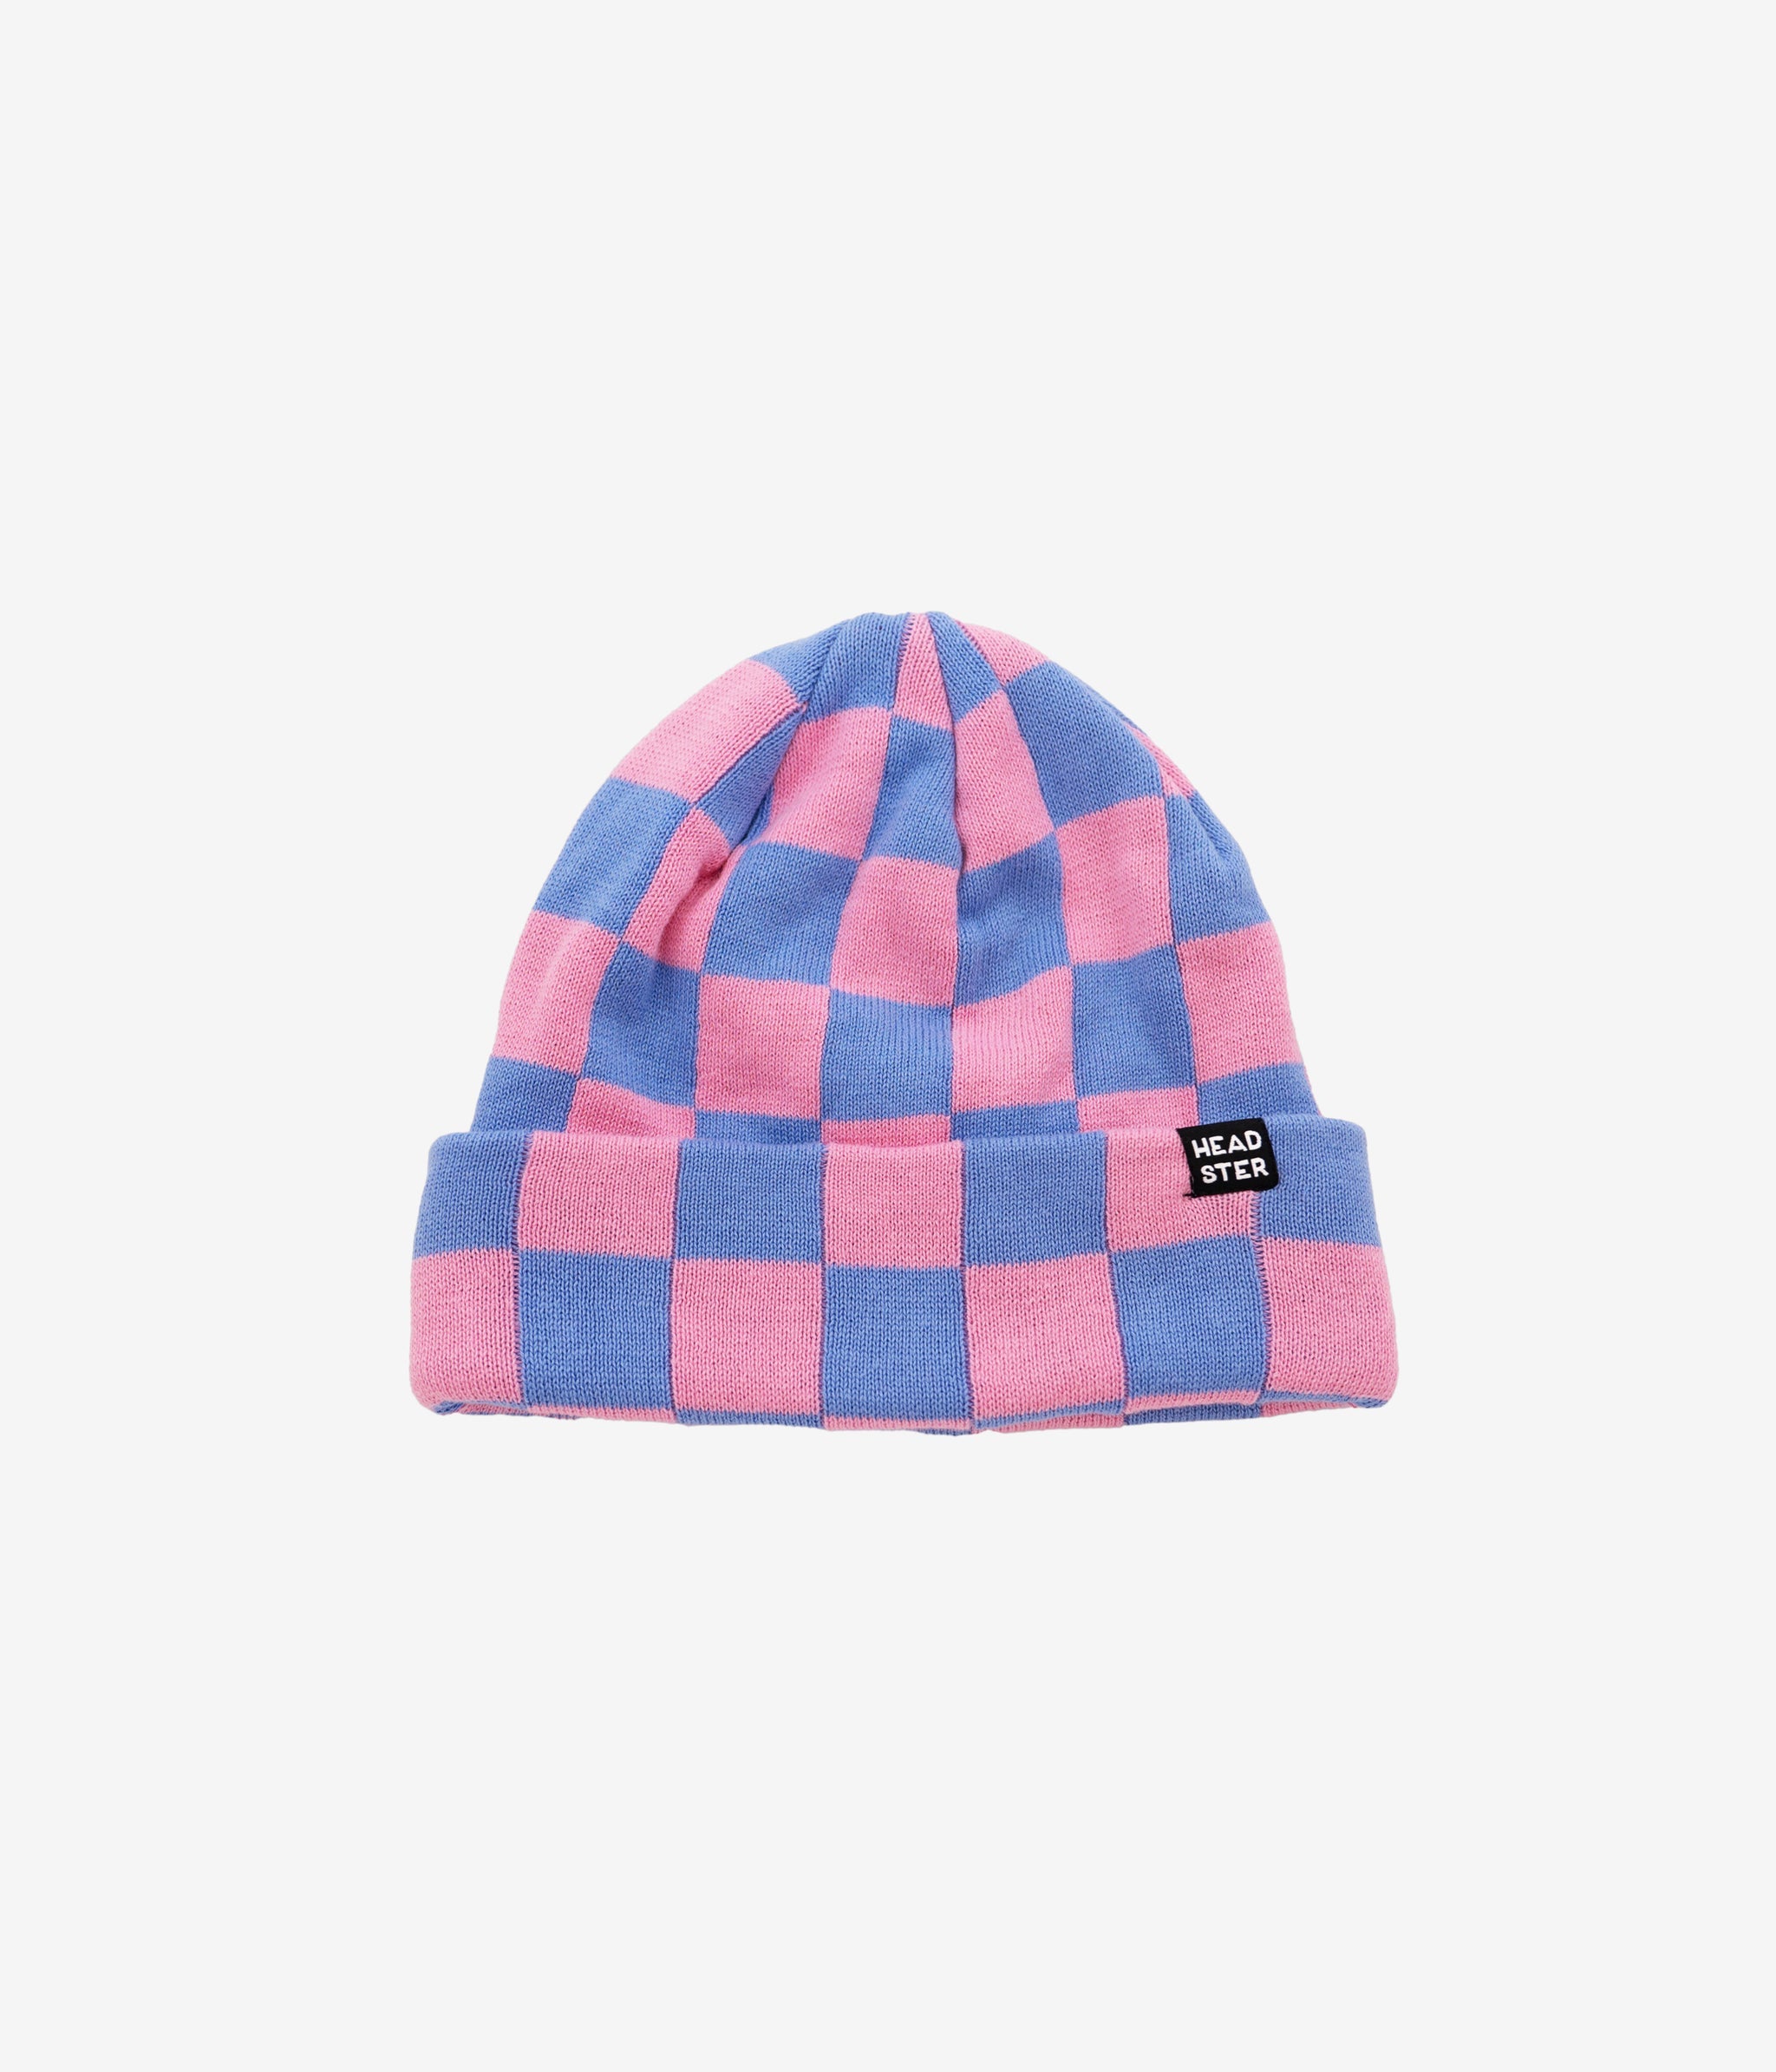 HEADSTER KIDS // TUQUES ENFANT CHECK YOURSELF, rose